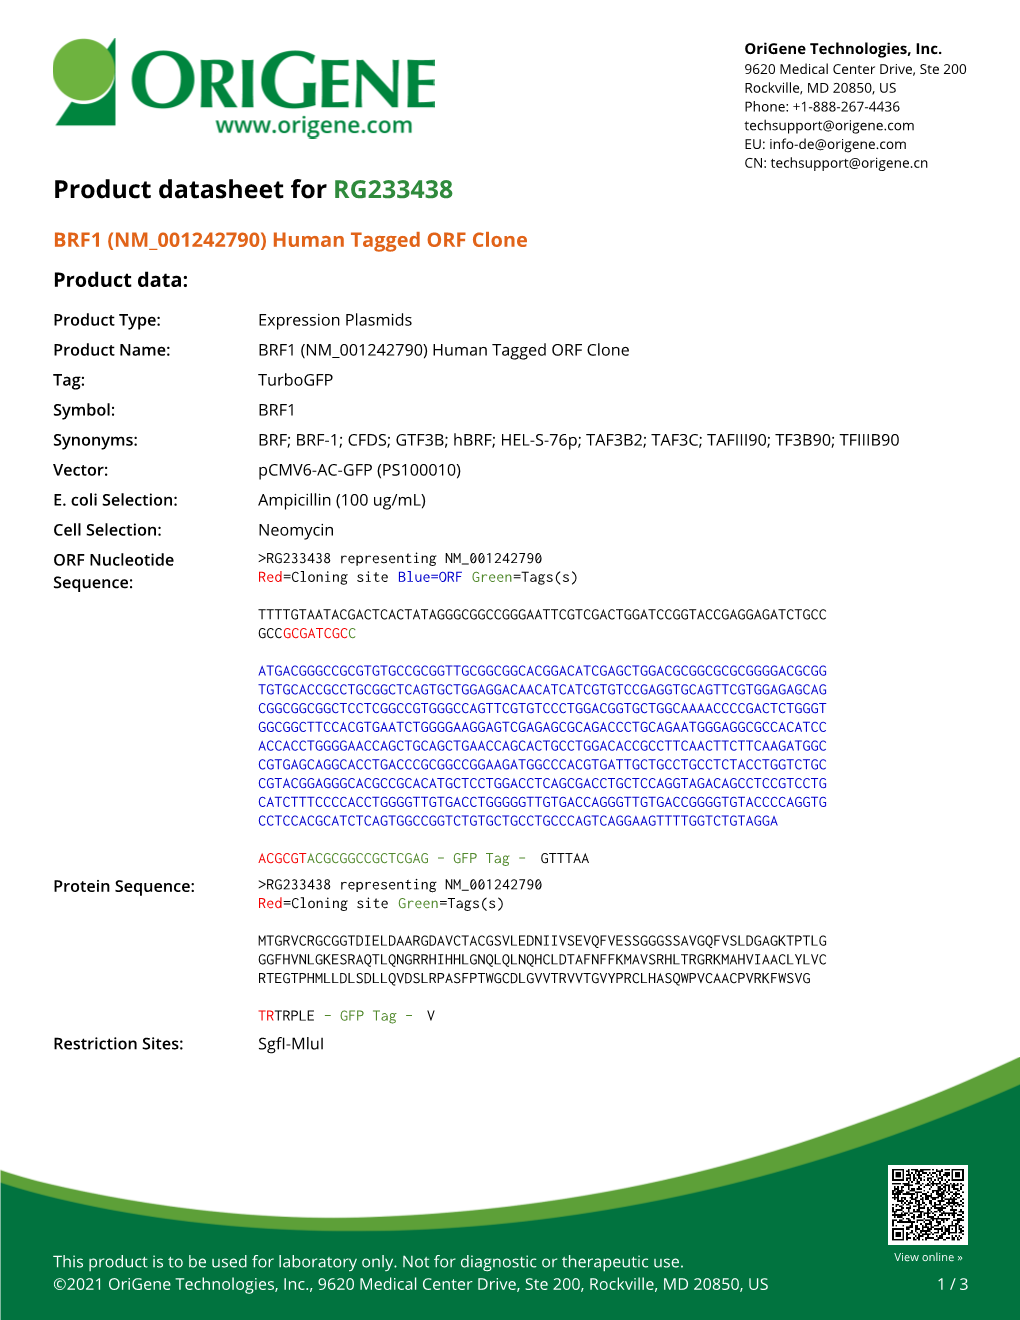 BRF1 (NM 001242790) Human Tagged ORF Clone Product Data